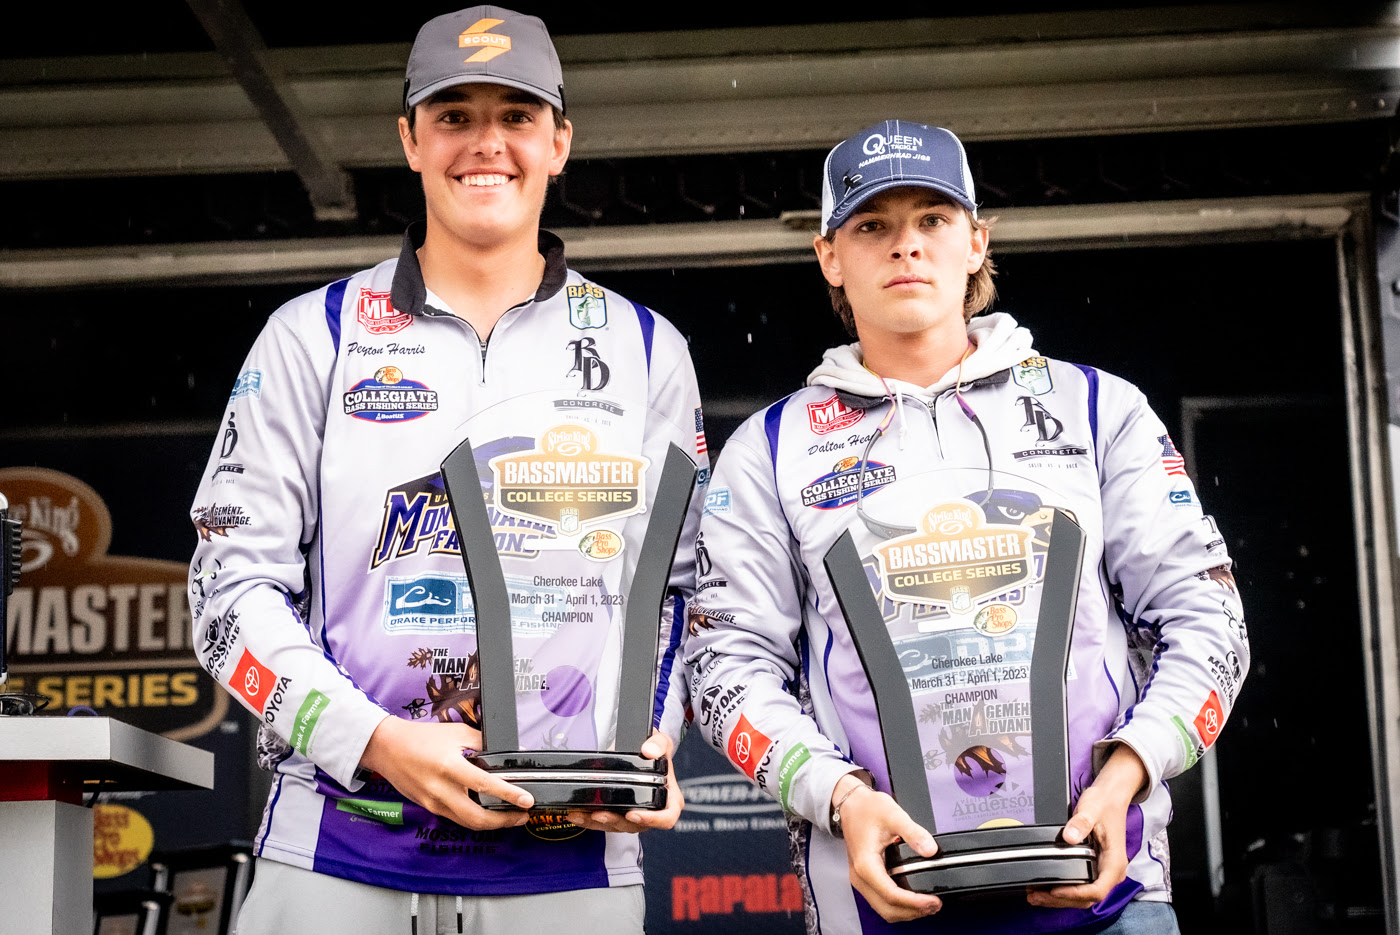 Montevallo's Harris and Head claim win in Bassmaster College Series